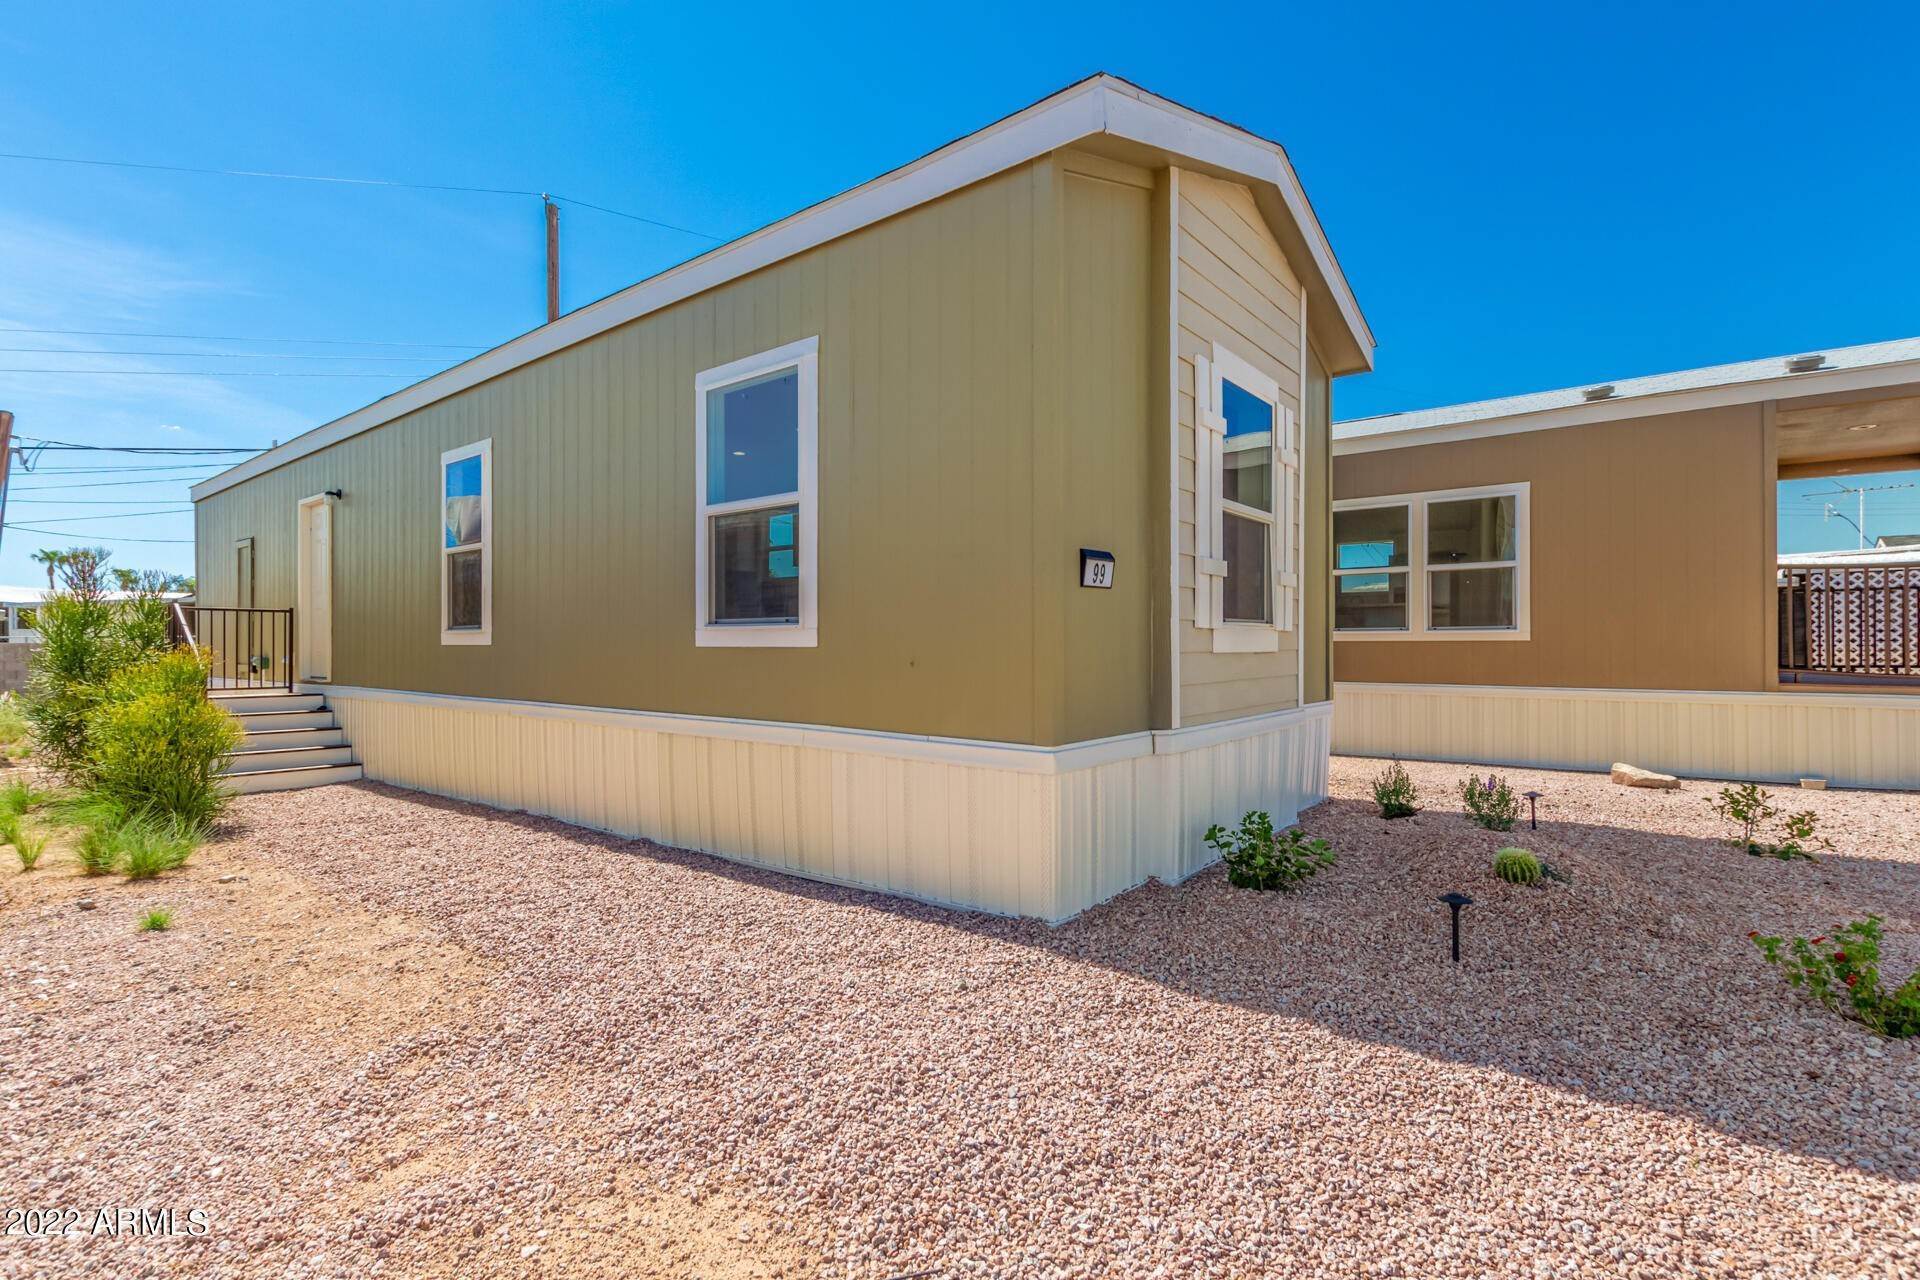 17. Manufactured Home for Sale at Mesa, AZ 85207